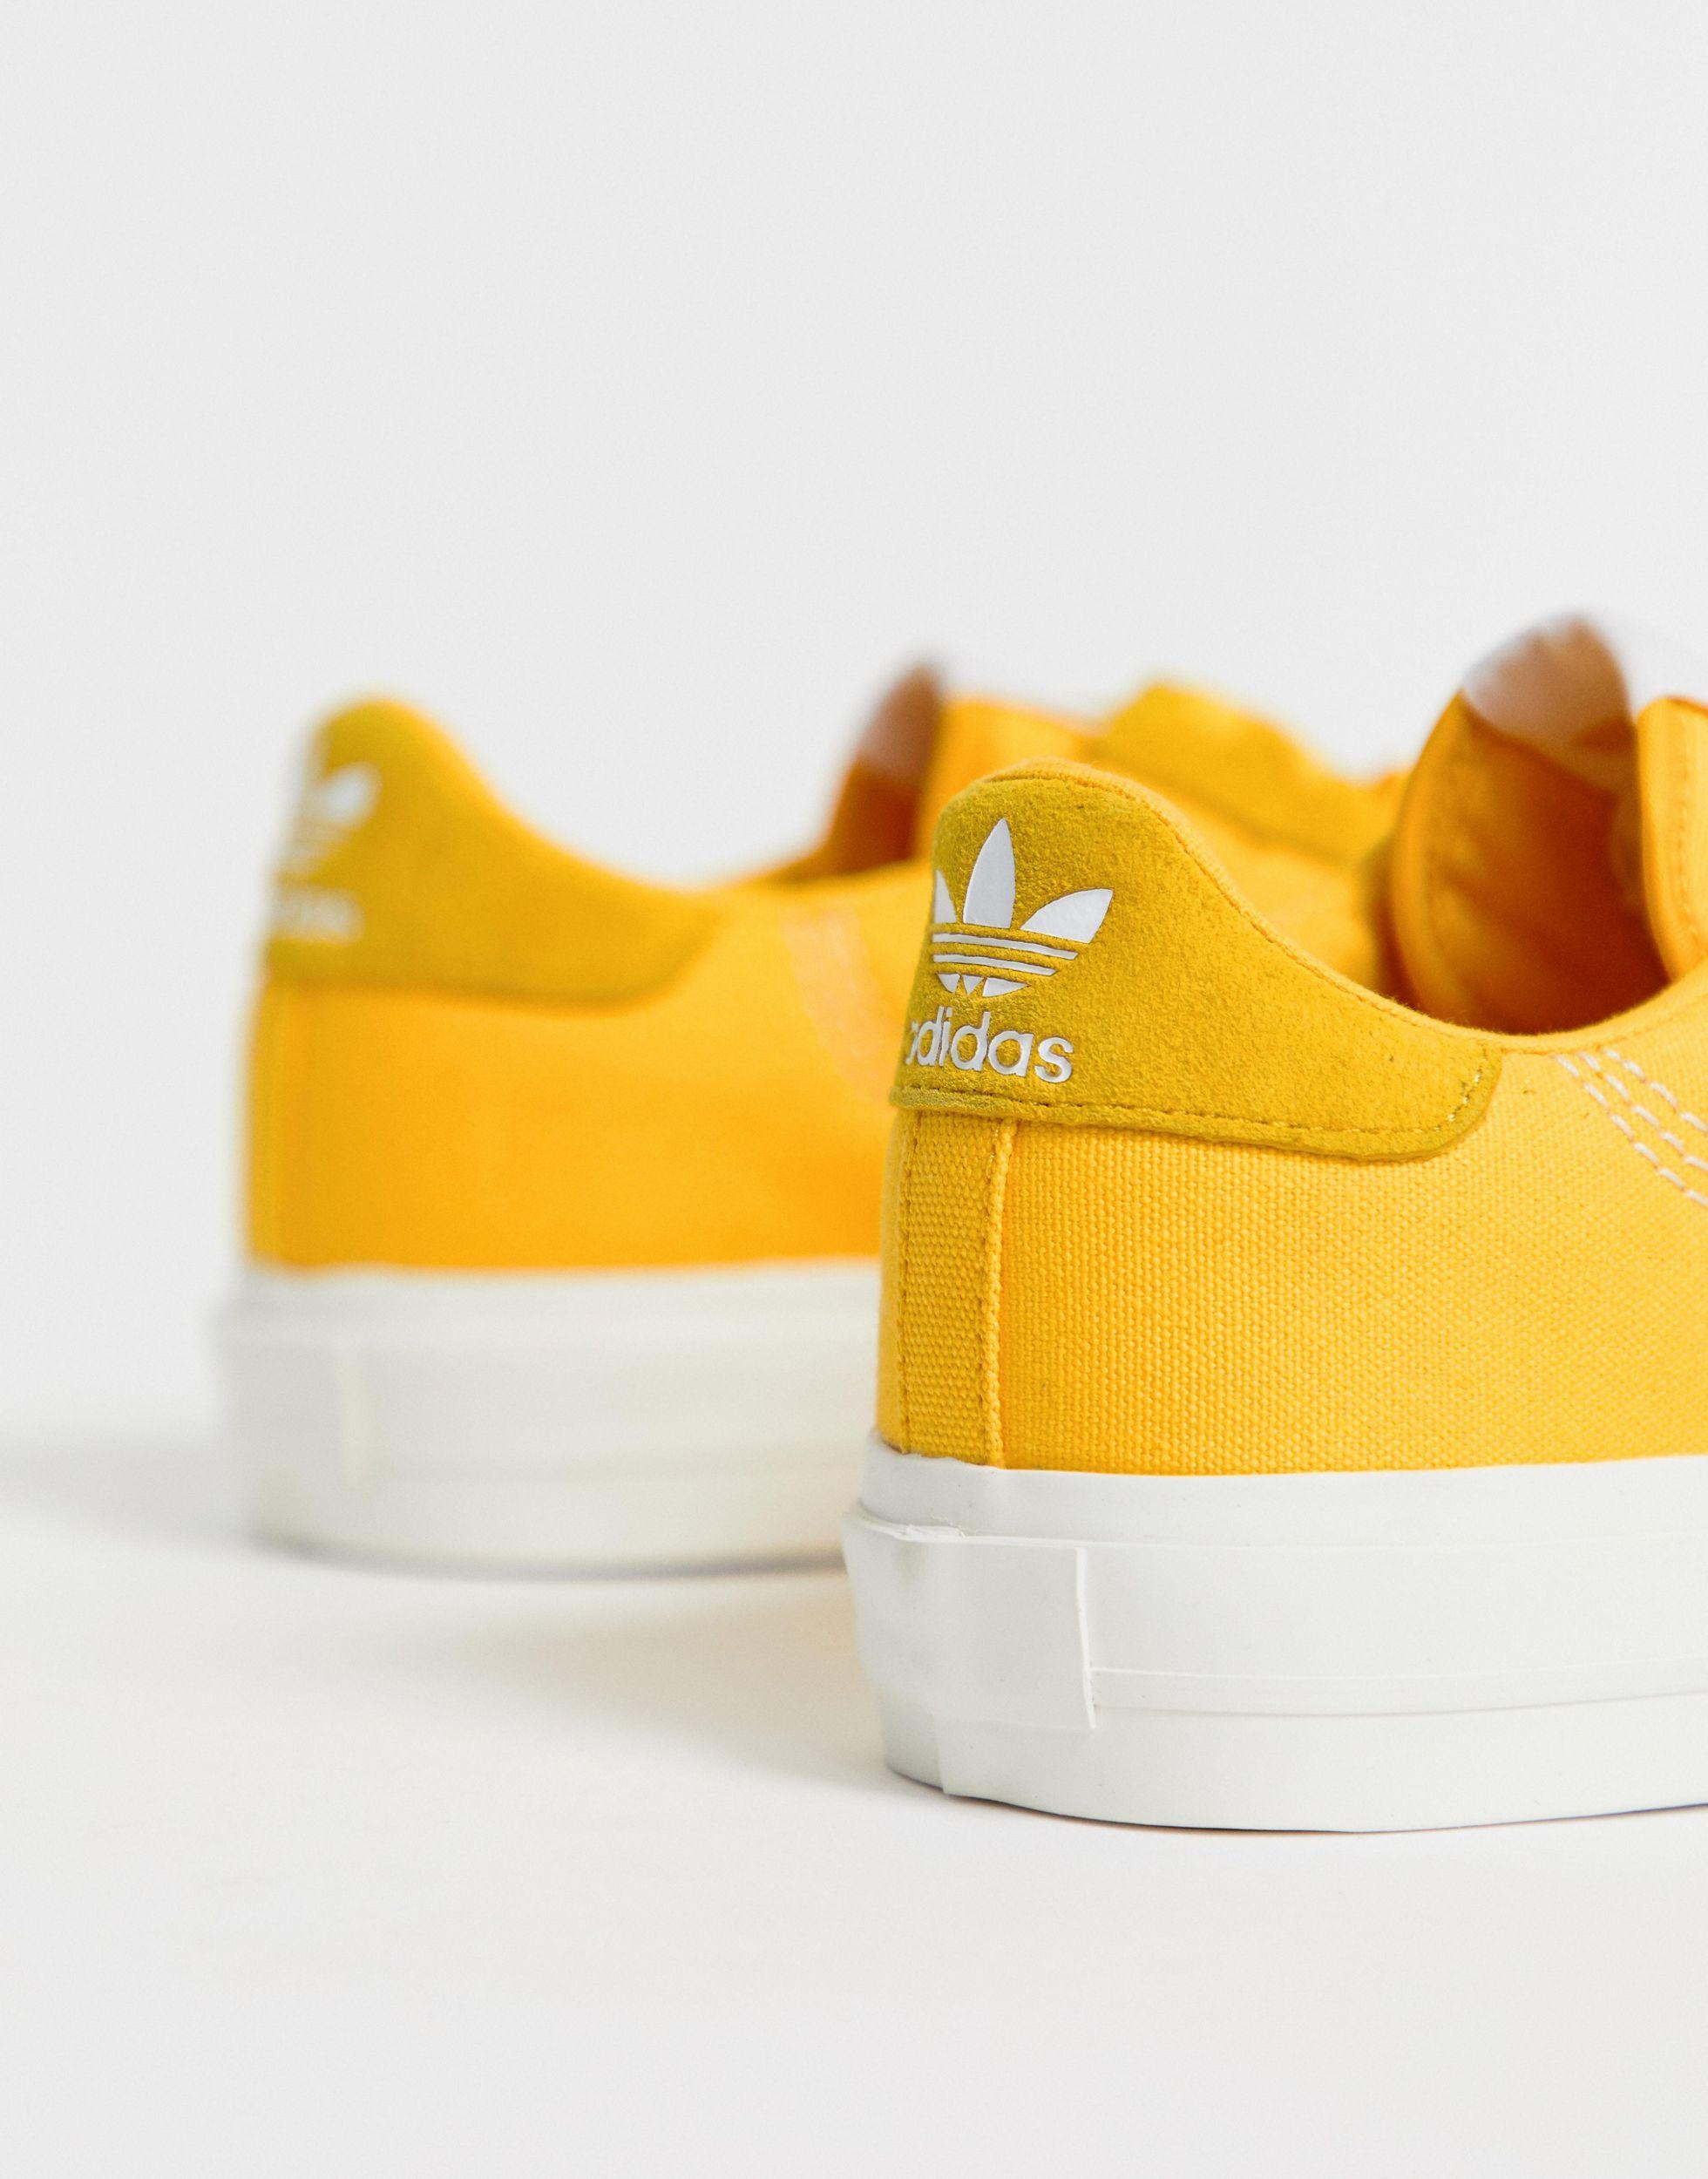 adidas Originals Canvas Continental 80 Vulc Trainers in Yellow - Lyst